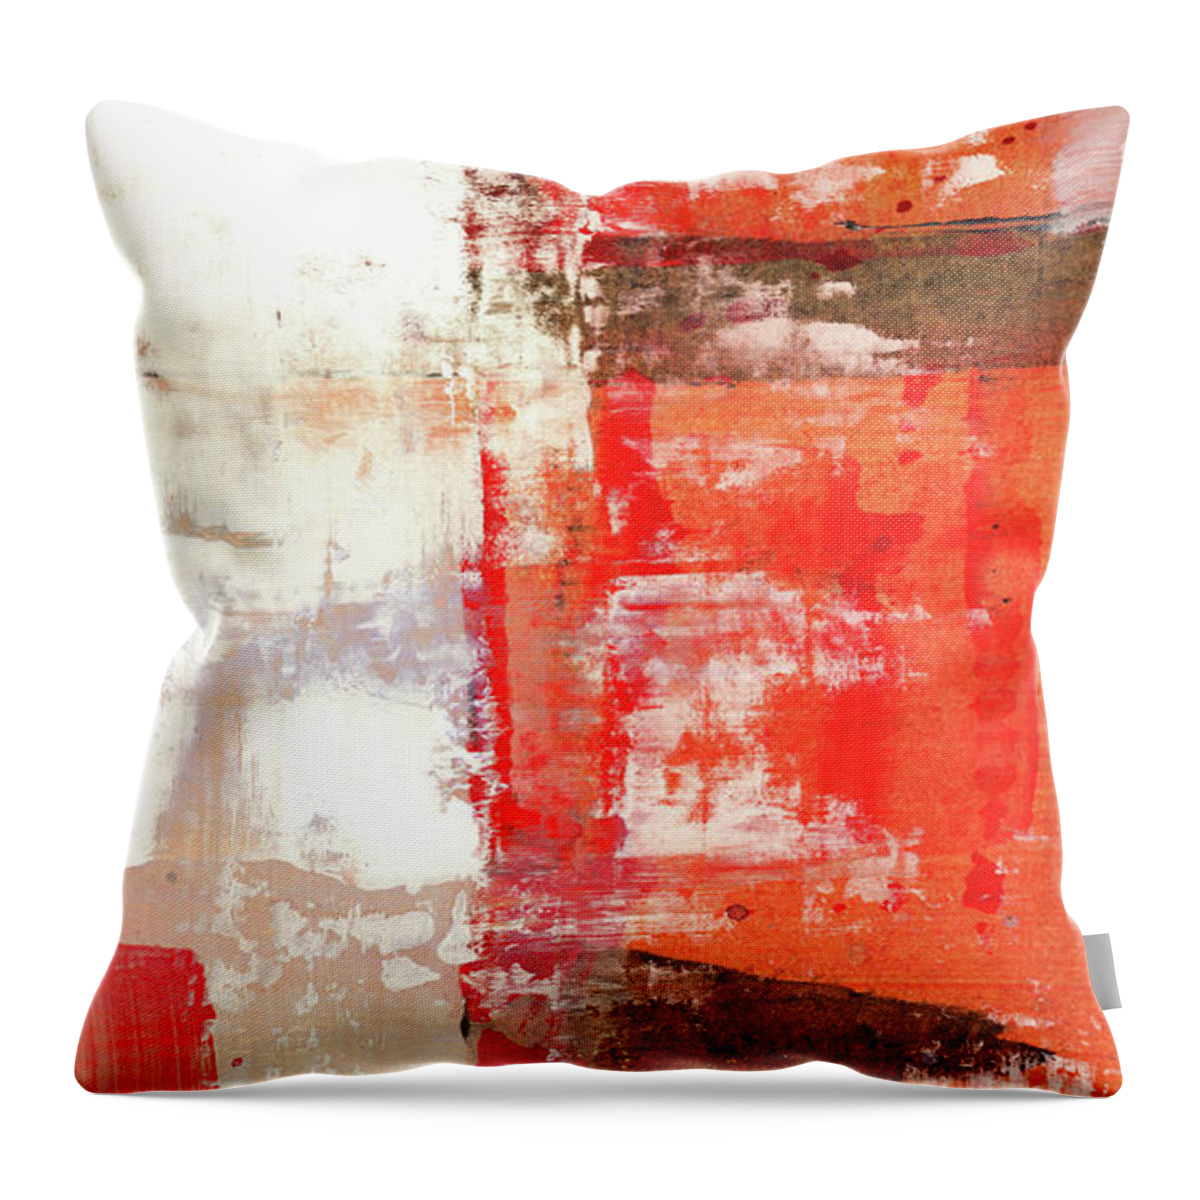 Art Throw Pillow featuring the painting Behind The Corner - Warm Linear Abstract Painting by Modern Abstract